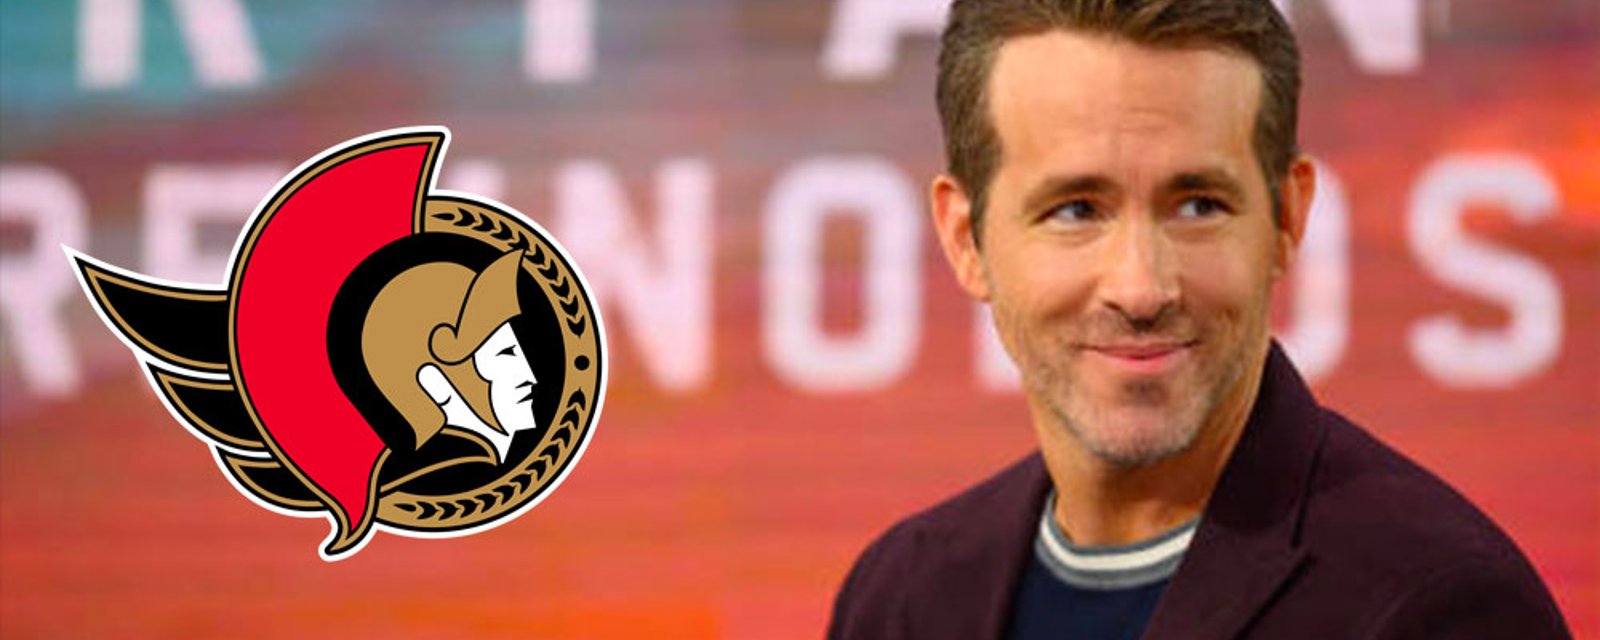 All signs point toward Hollywood actor Ryan Reynolds becoming new owner of the Ottawa Senators